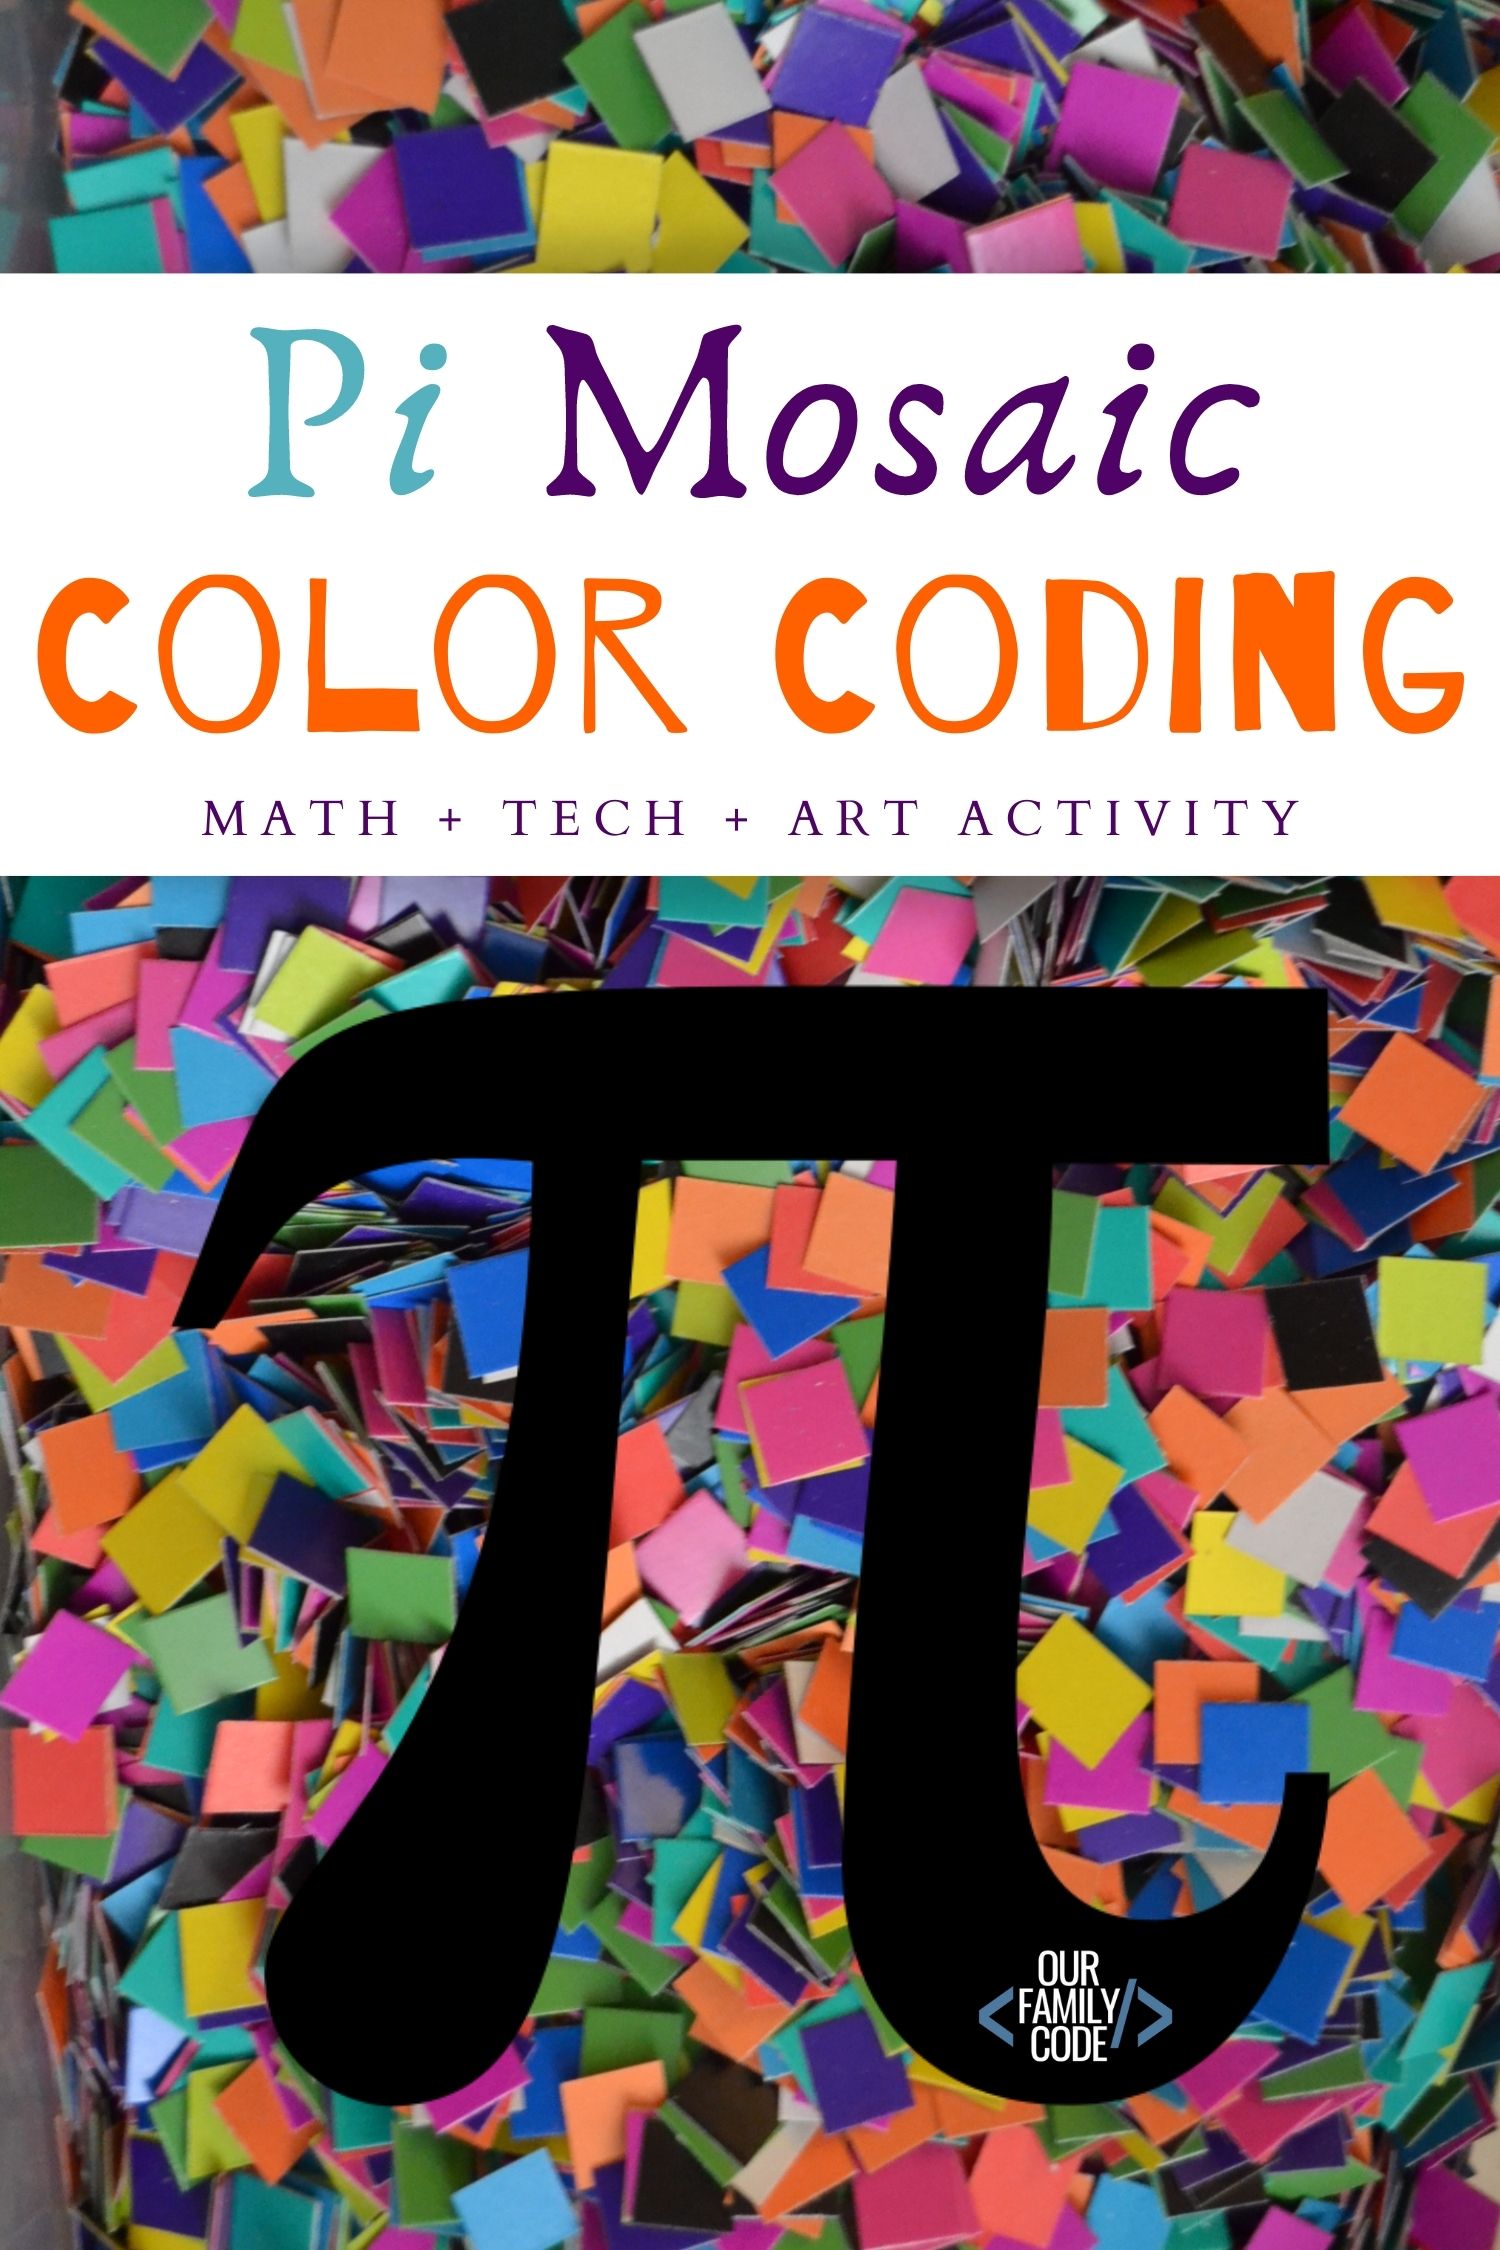 Check out this color coding mosaic pi cityscape activity that works on basic programming skills while introducing Pi. #STEAM #PiDay #Pi #mathactivitiesforkids #mathplusart #teachingkids #craftsforkids